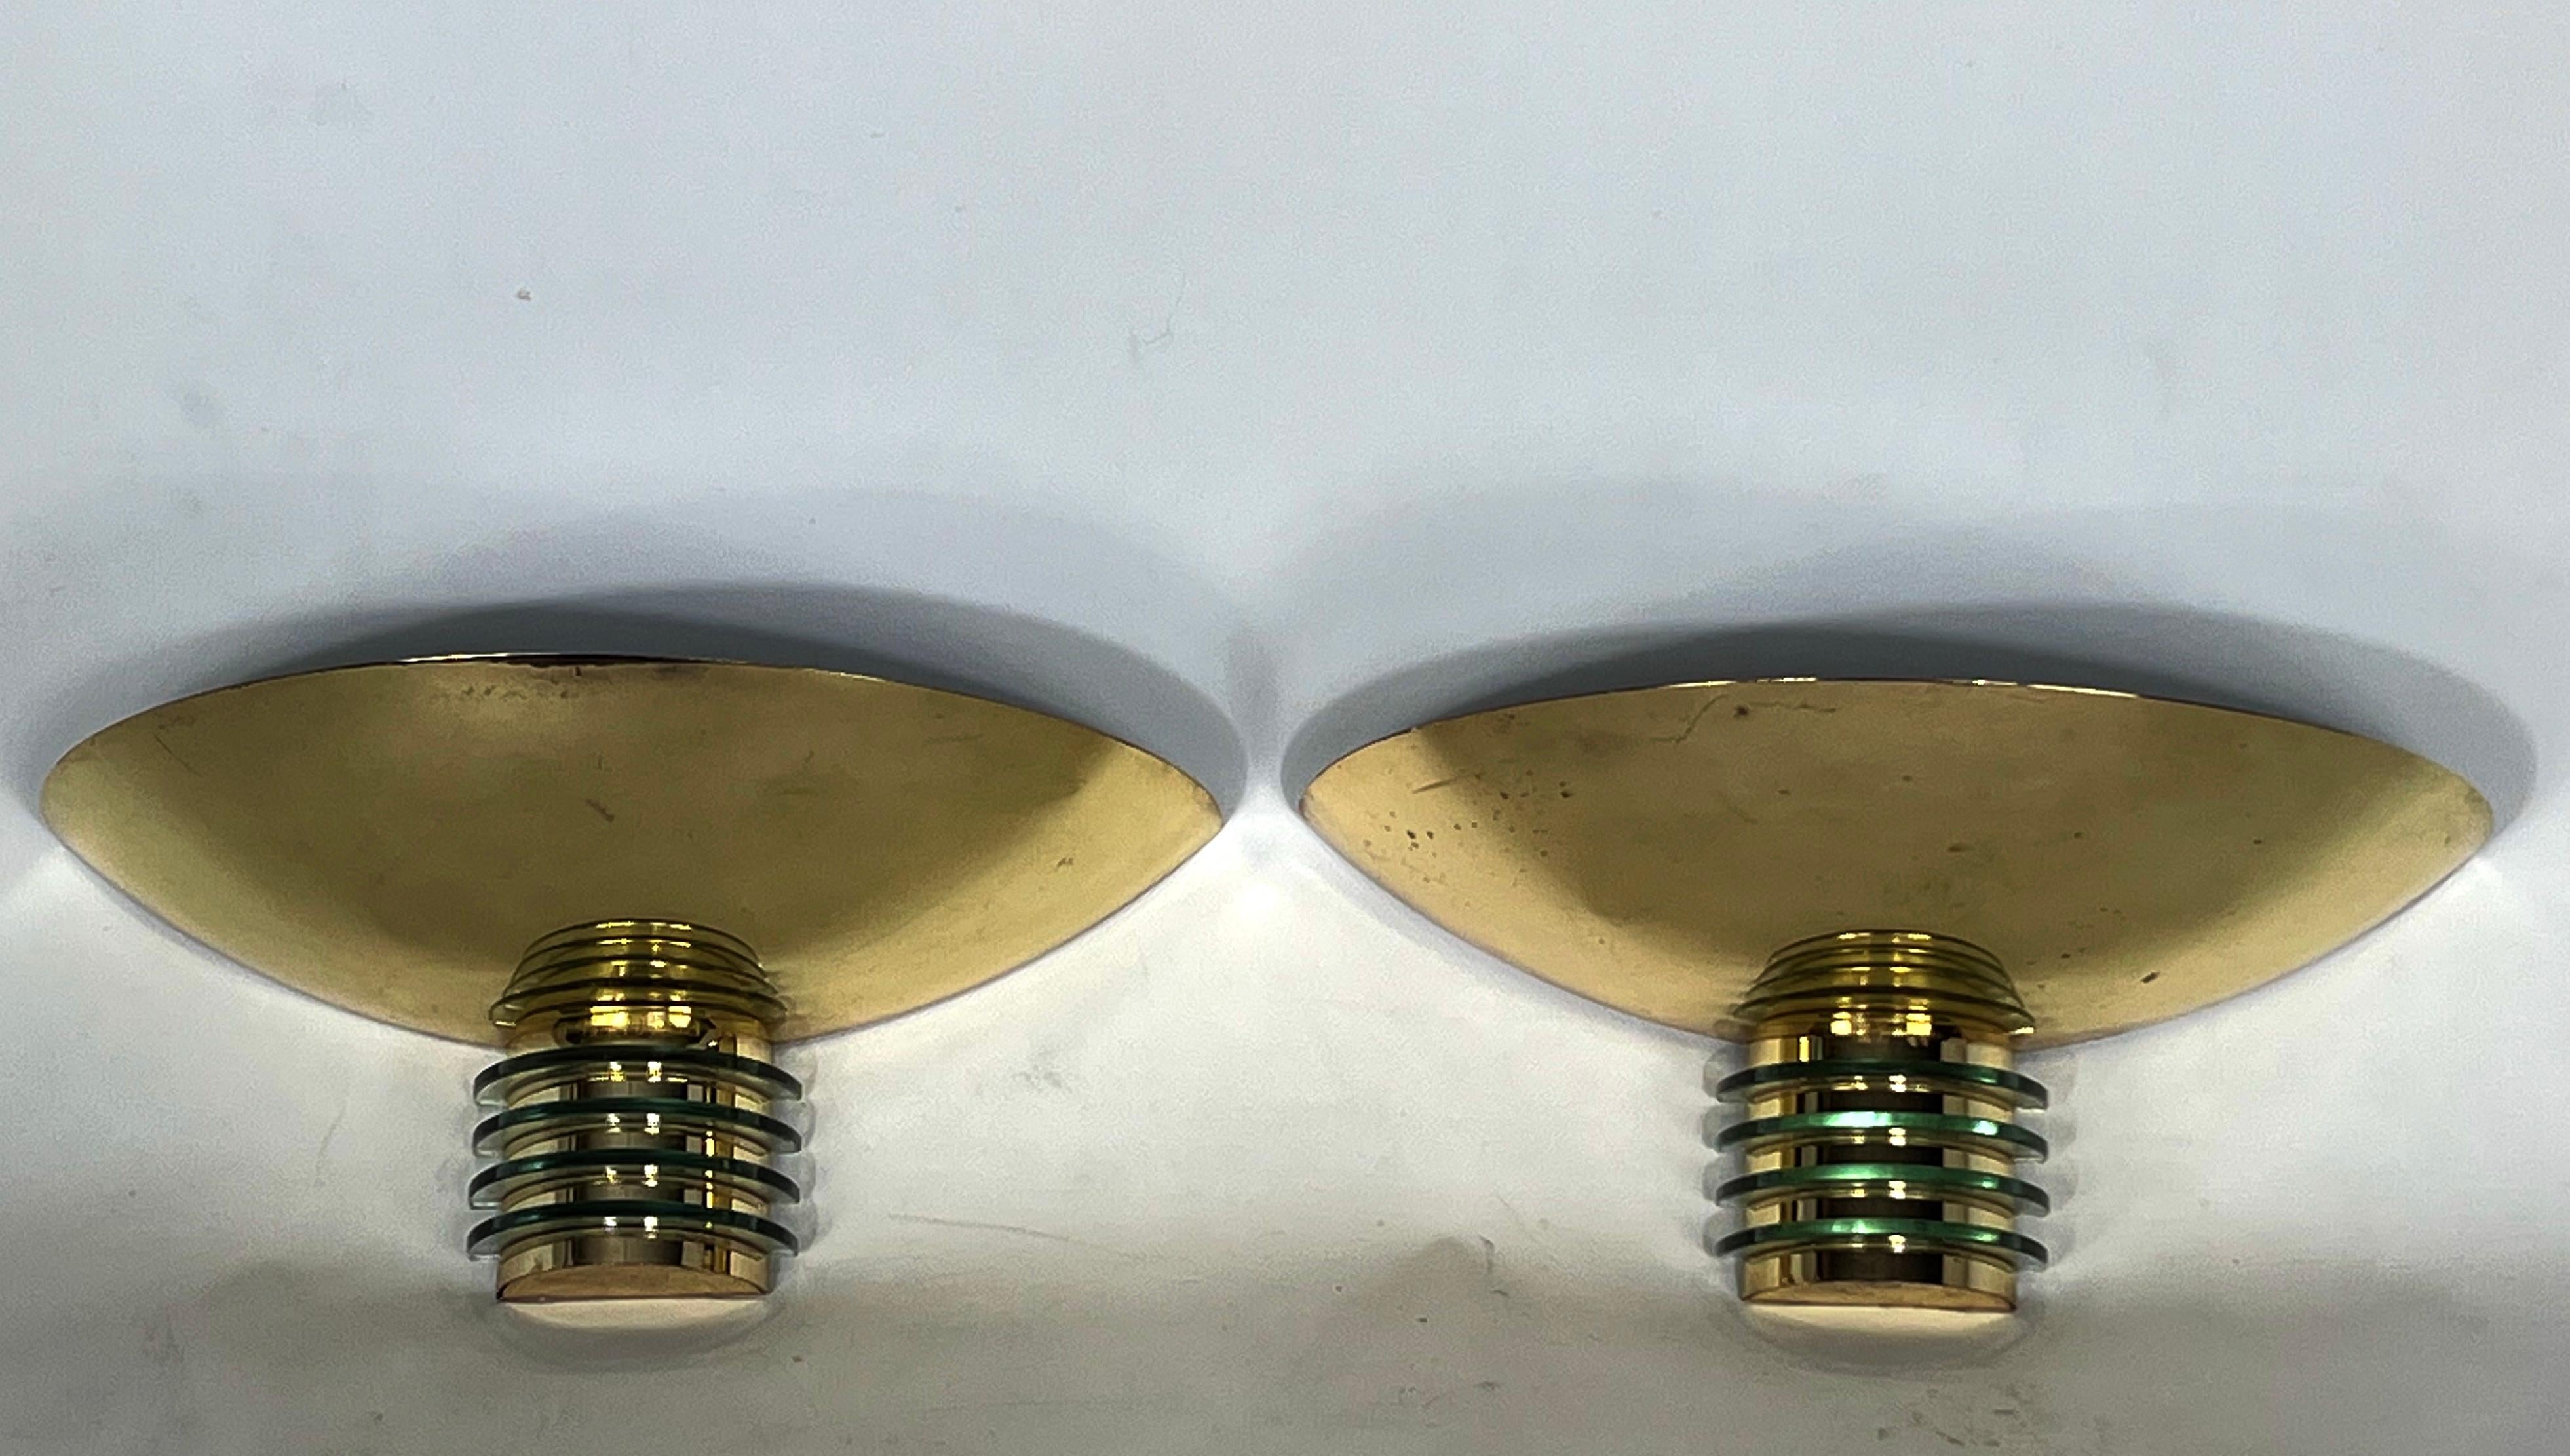 Good vintage and original condition with normal trace of age and use for this set of two sconces produced in France by SCE in Art Deco style. 1970s. They're made from gilded metal in original patina with small dots and glass.